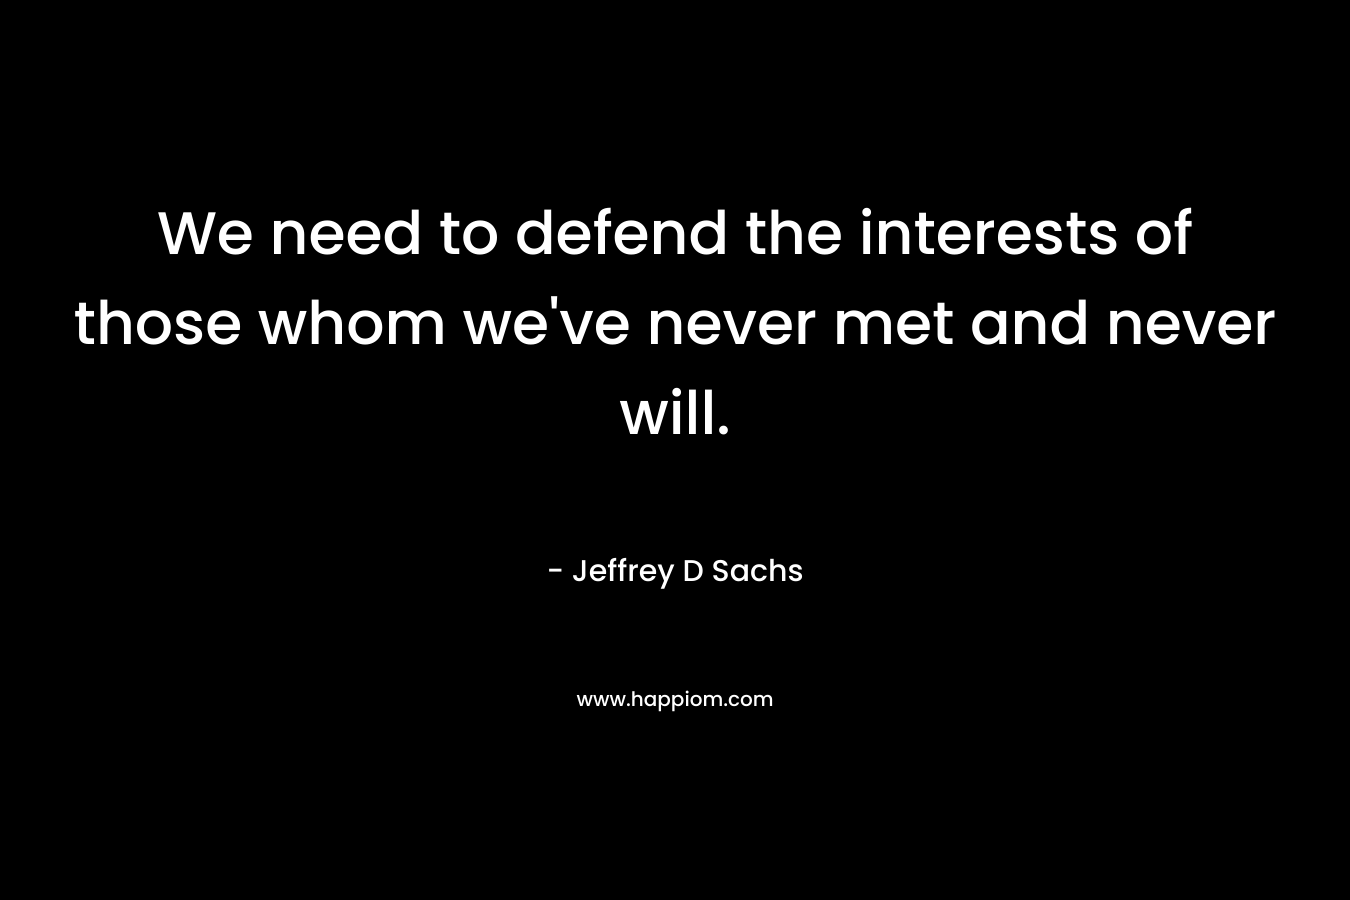 We need to defend the interests of those whom we’ve never met and never will. – Jeffrey D Sachs